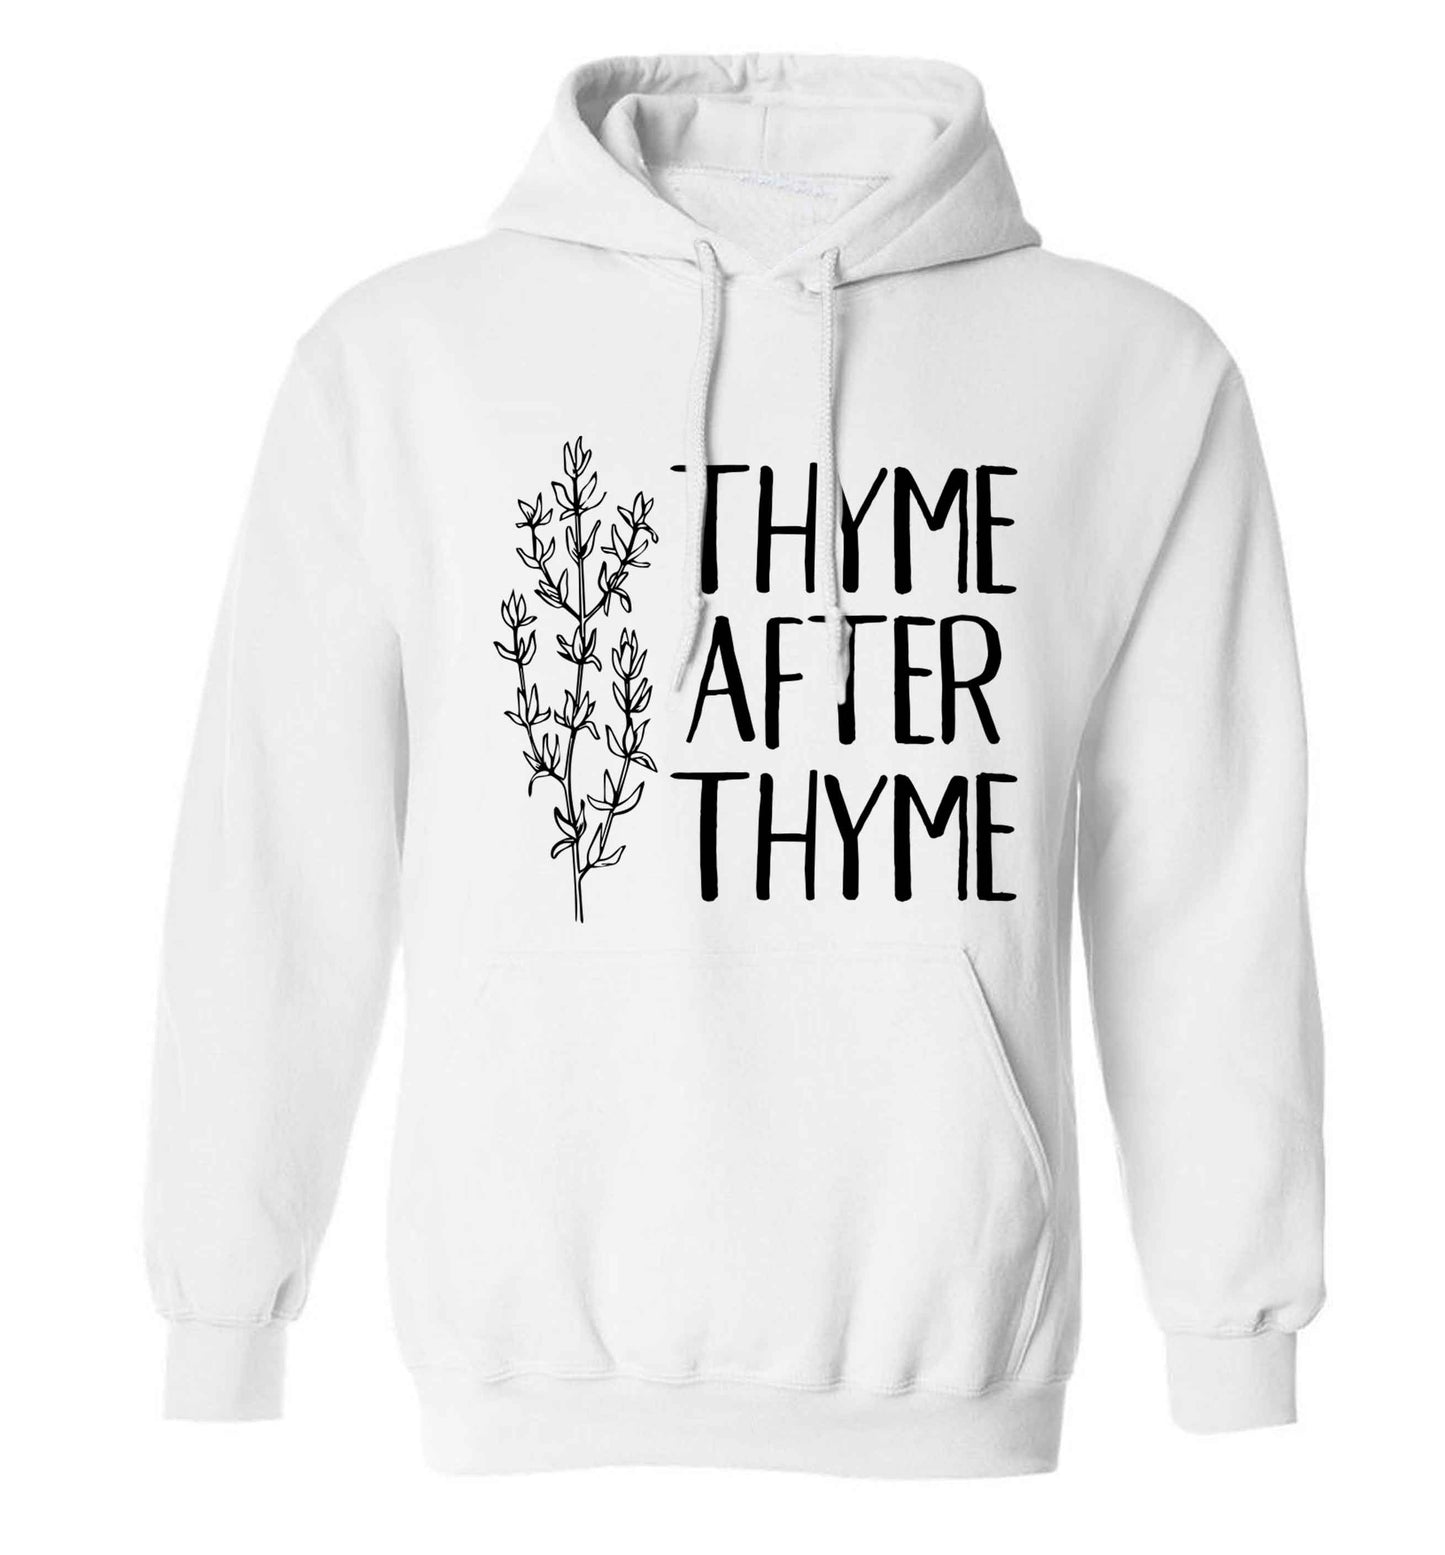 Thyme after thyme adults unisex white hoodie 2XL